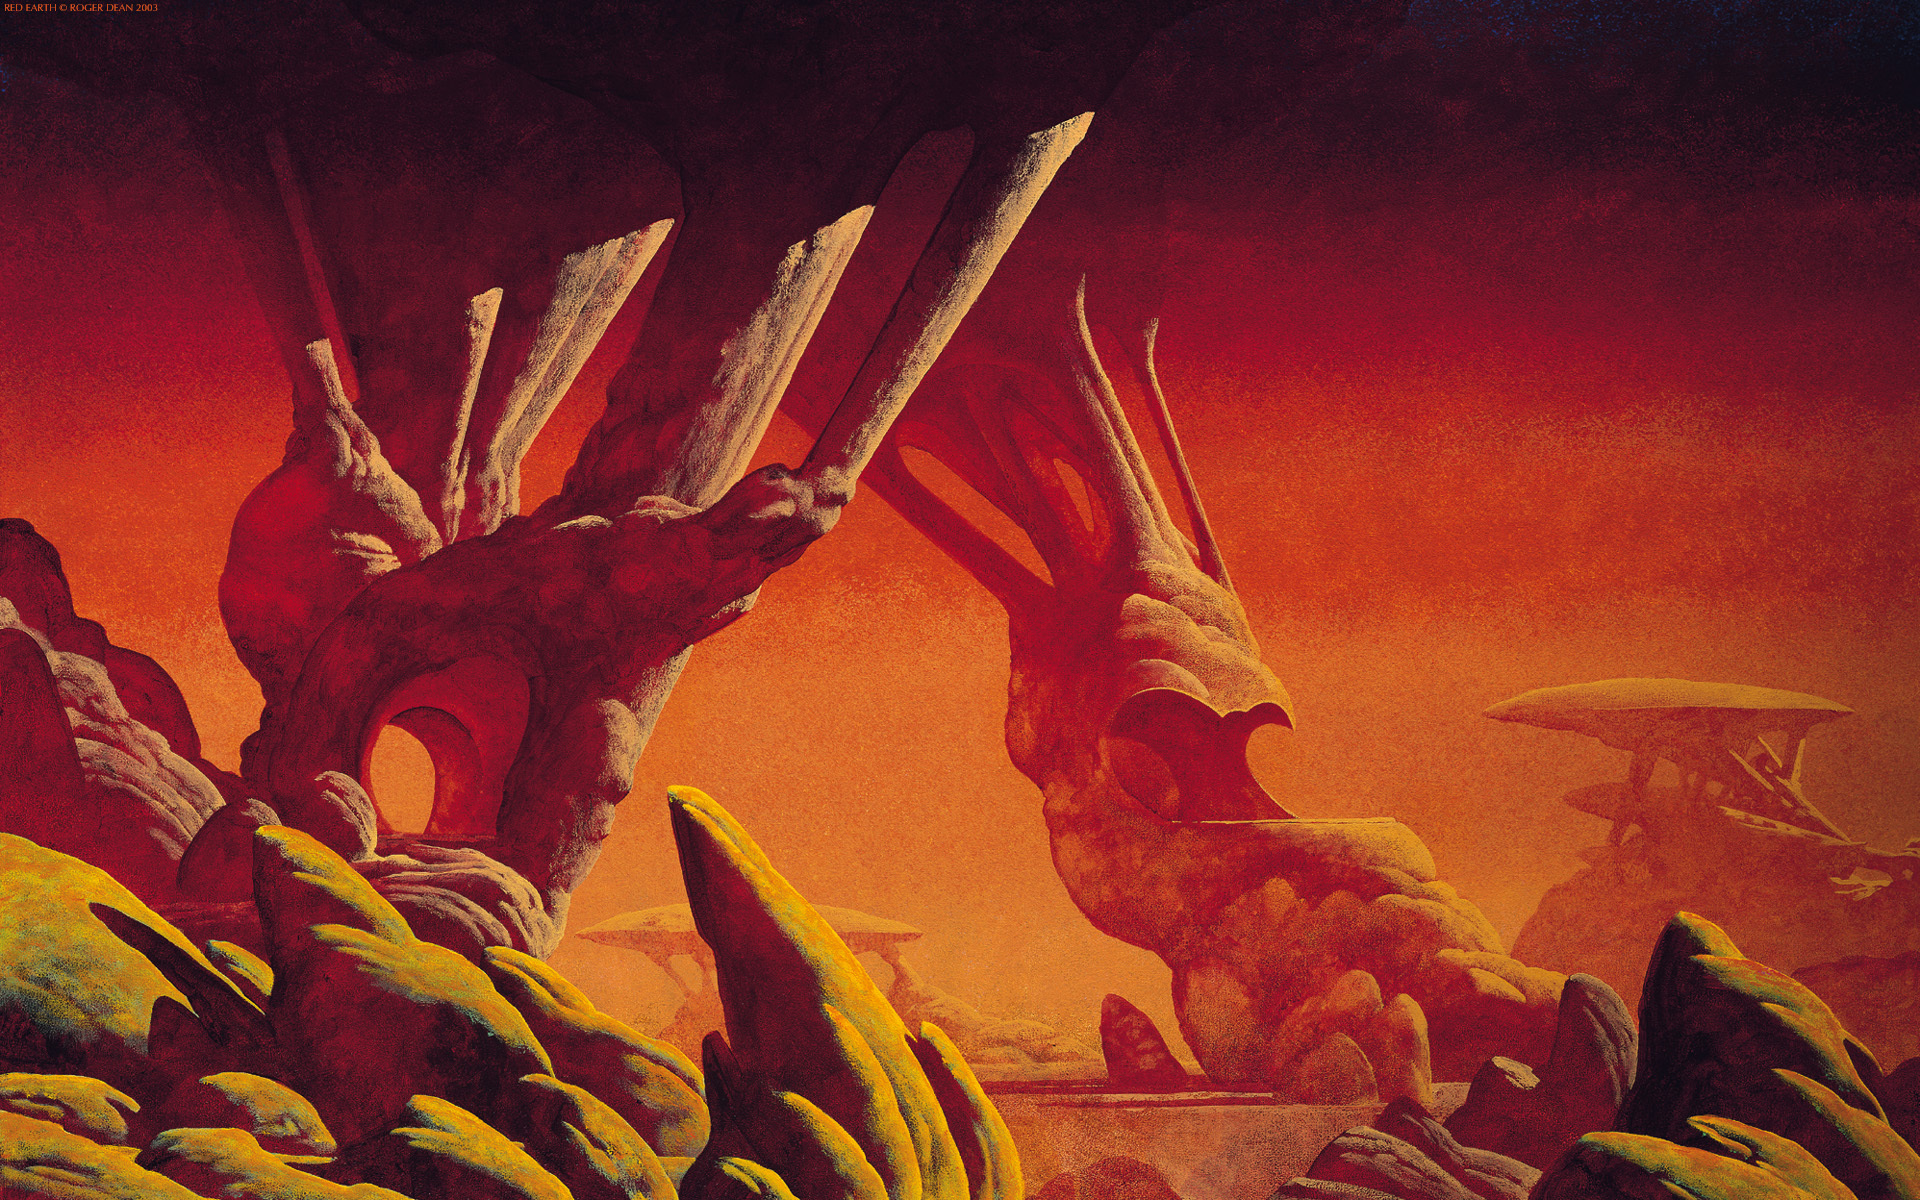 Digital Art Abstract Red Roger Dean 2003 Year 1920x1200